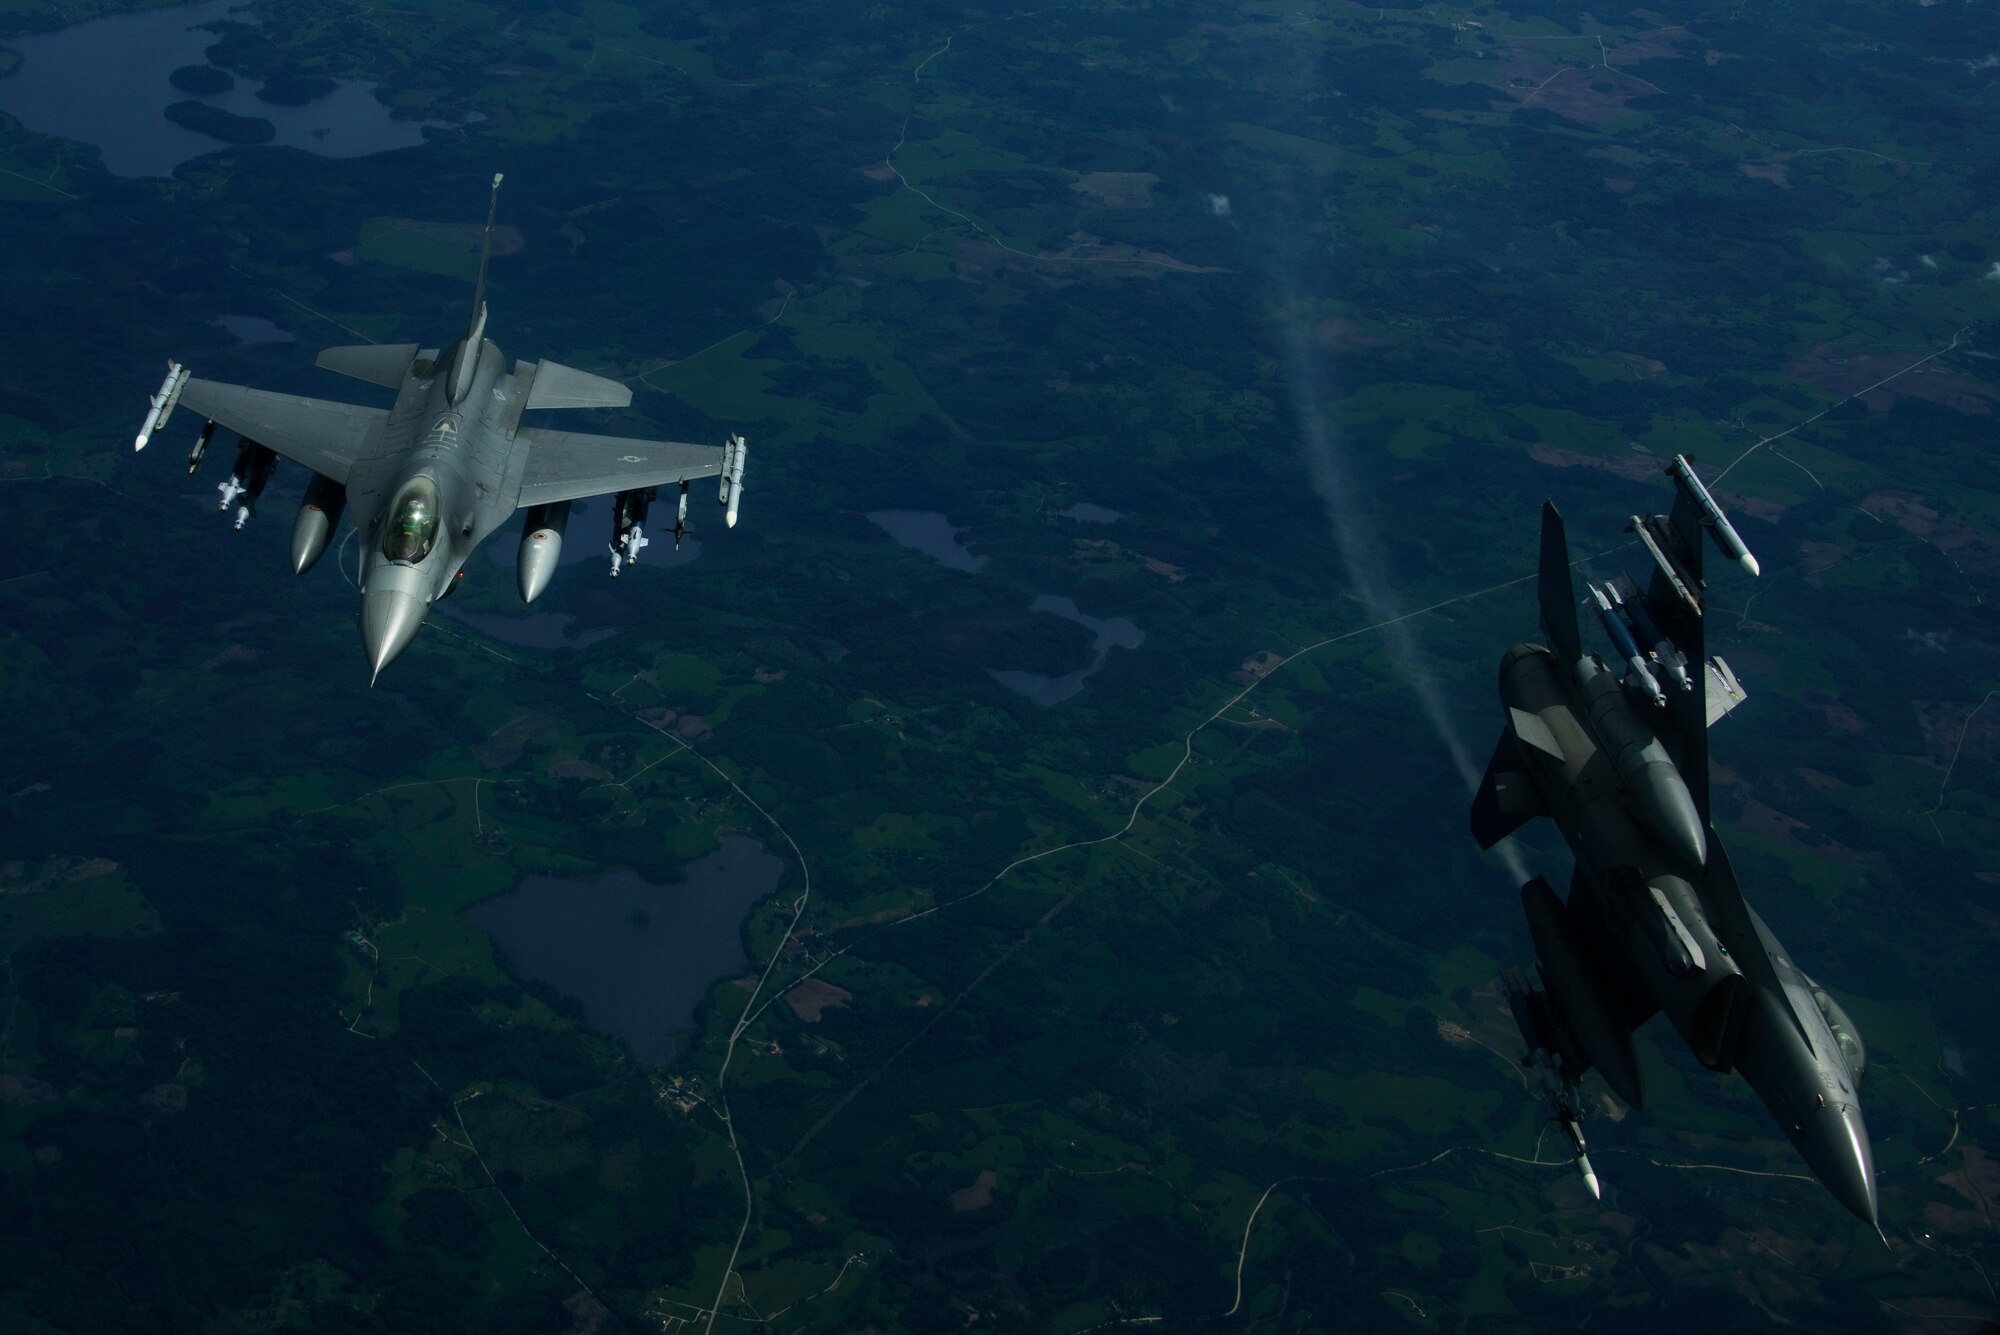 Two F-16 Fighting Falcons, 510th Fighter Squadron, are deployed to Krzesiny Air Base, Poland, in support of
Aviation Detachment rotation 17-3, exercise BALTOPS and exercise Saber Strike fly over Latvia, June 7, 2017. The
exercise, is designed to enhance flexibility and interoperability, to strengthen combined response capabilities, as well as demonstrate resolve among Allied and Partner Nations' forces to ensure stability in, and if necessary defend, the Baltic Sea region. (U.S. Air Force photo by Staff Sgt. Jonathan Snyder)